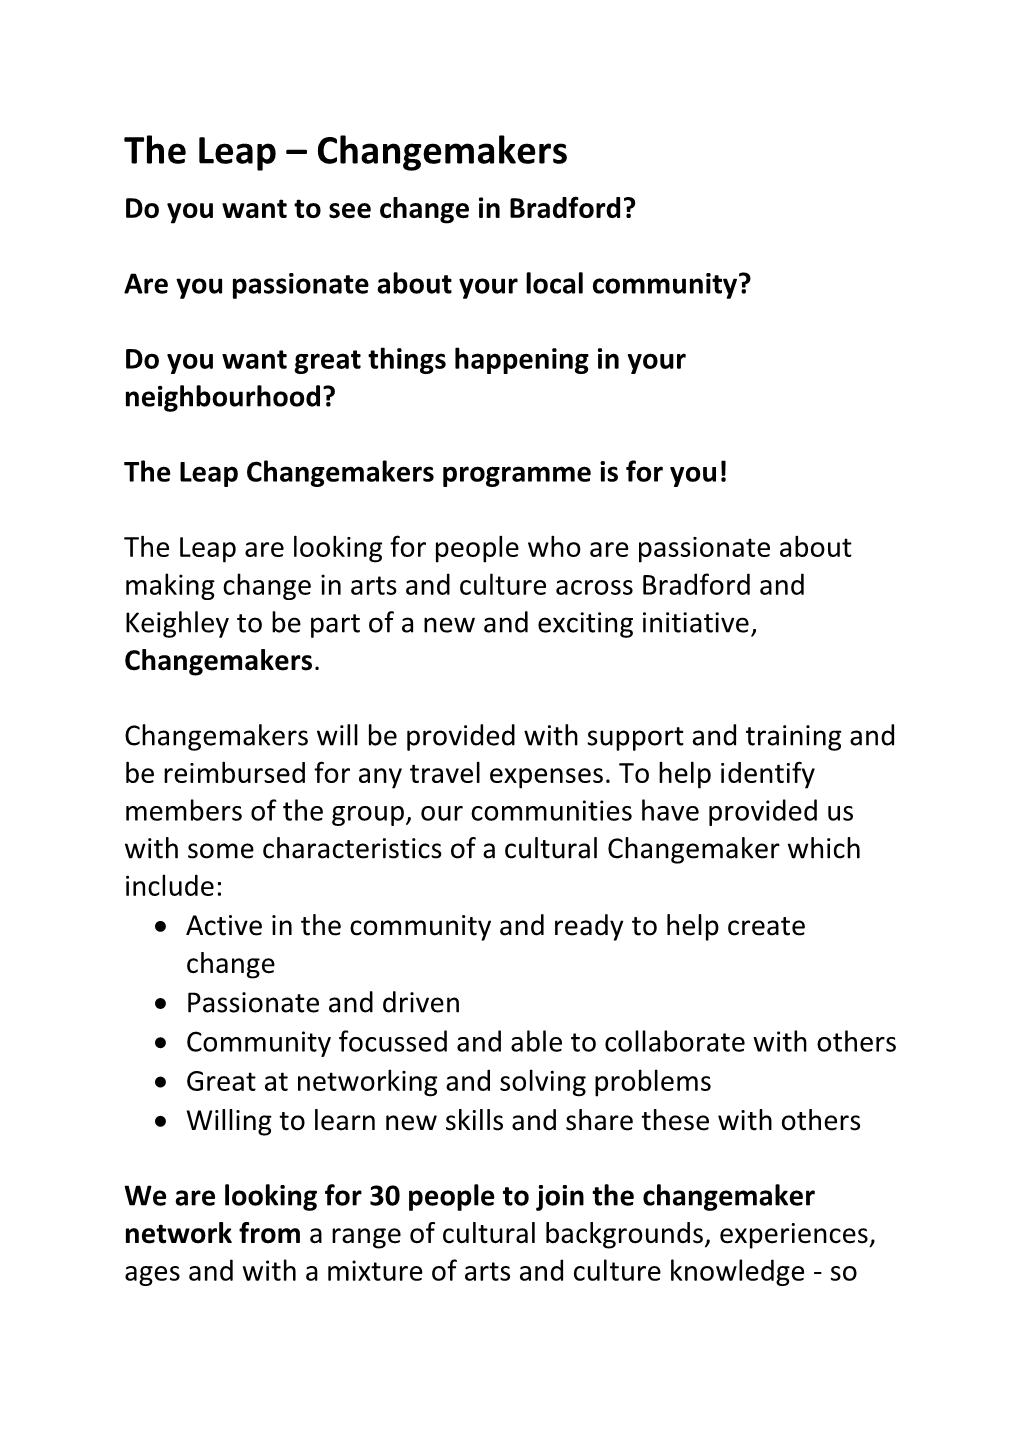 Changemakers Do You Want to See Change in Bradford?